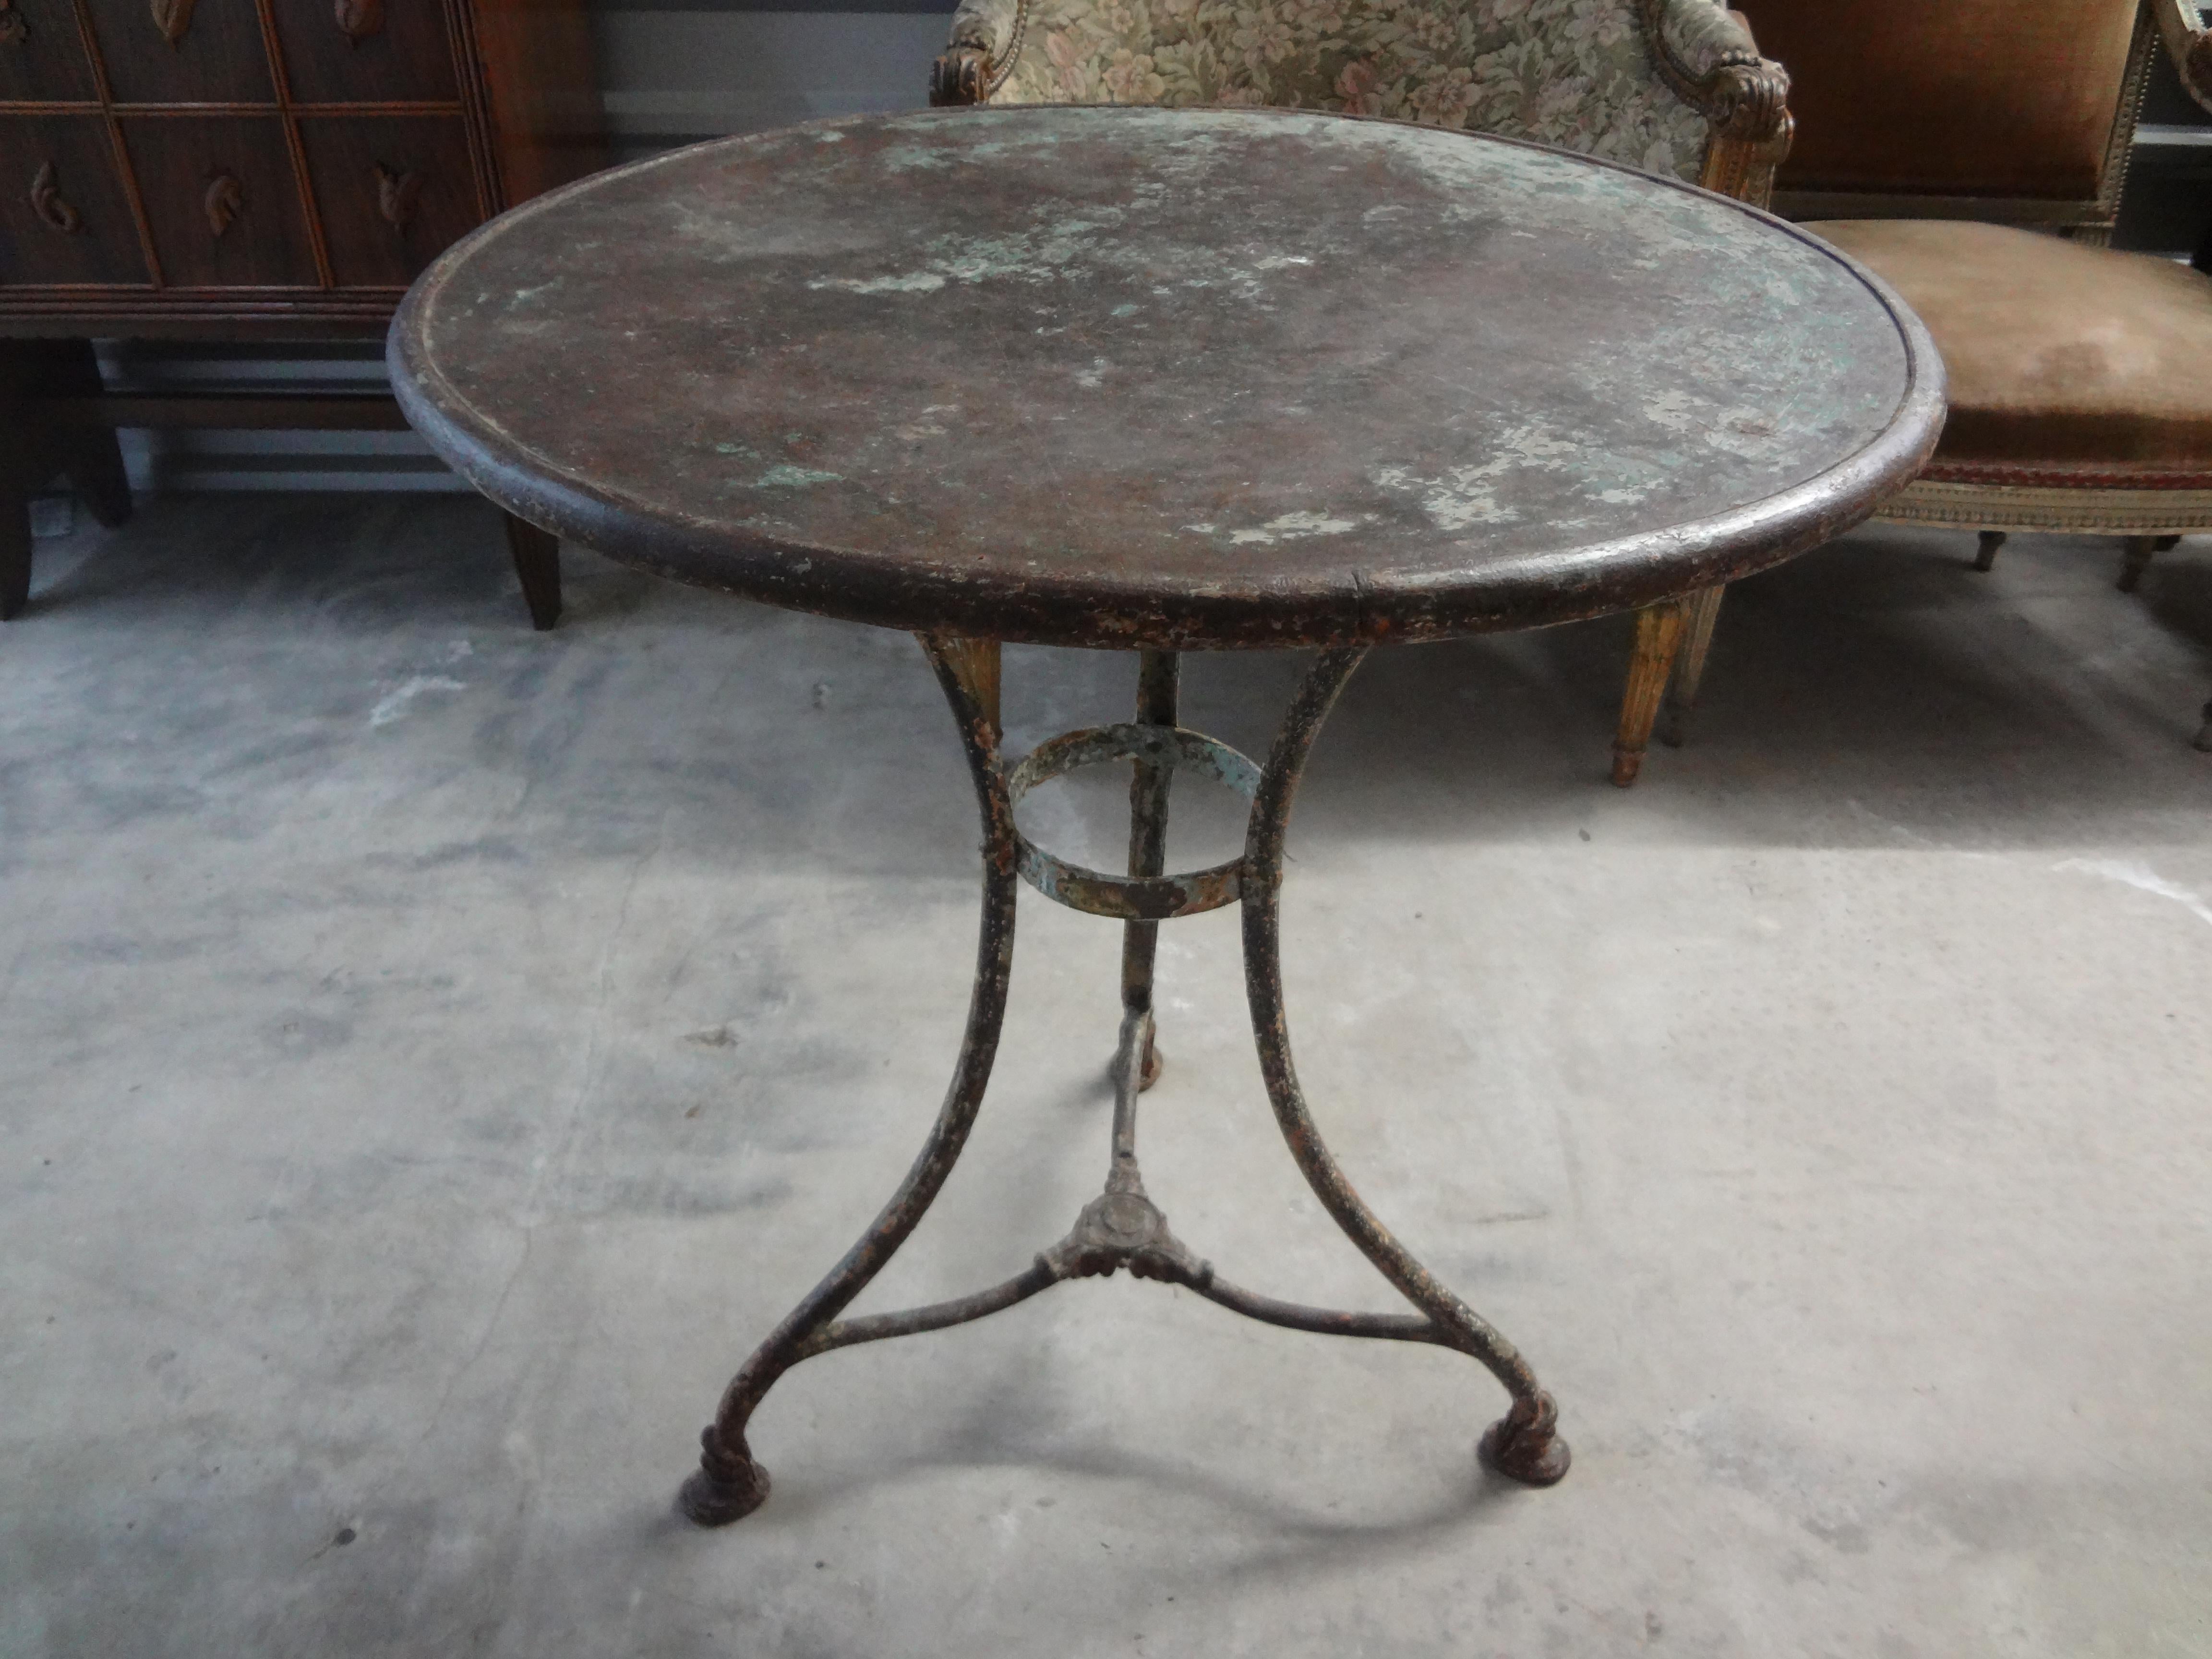 Cast 19th Century French Garden Table By Arras Foundry